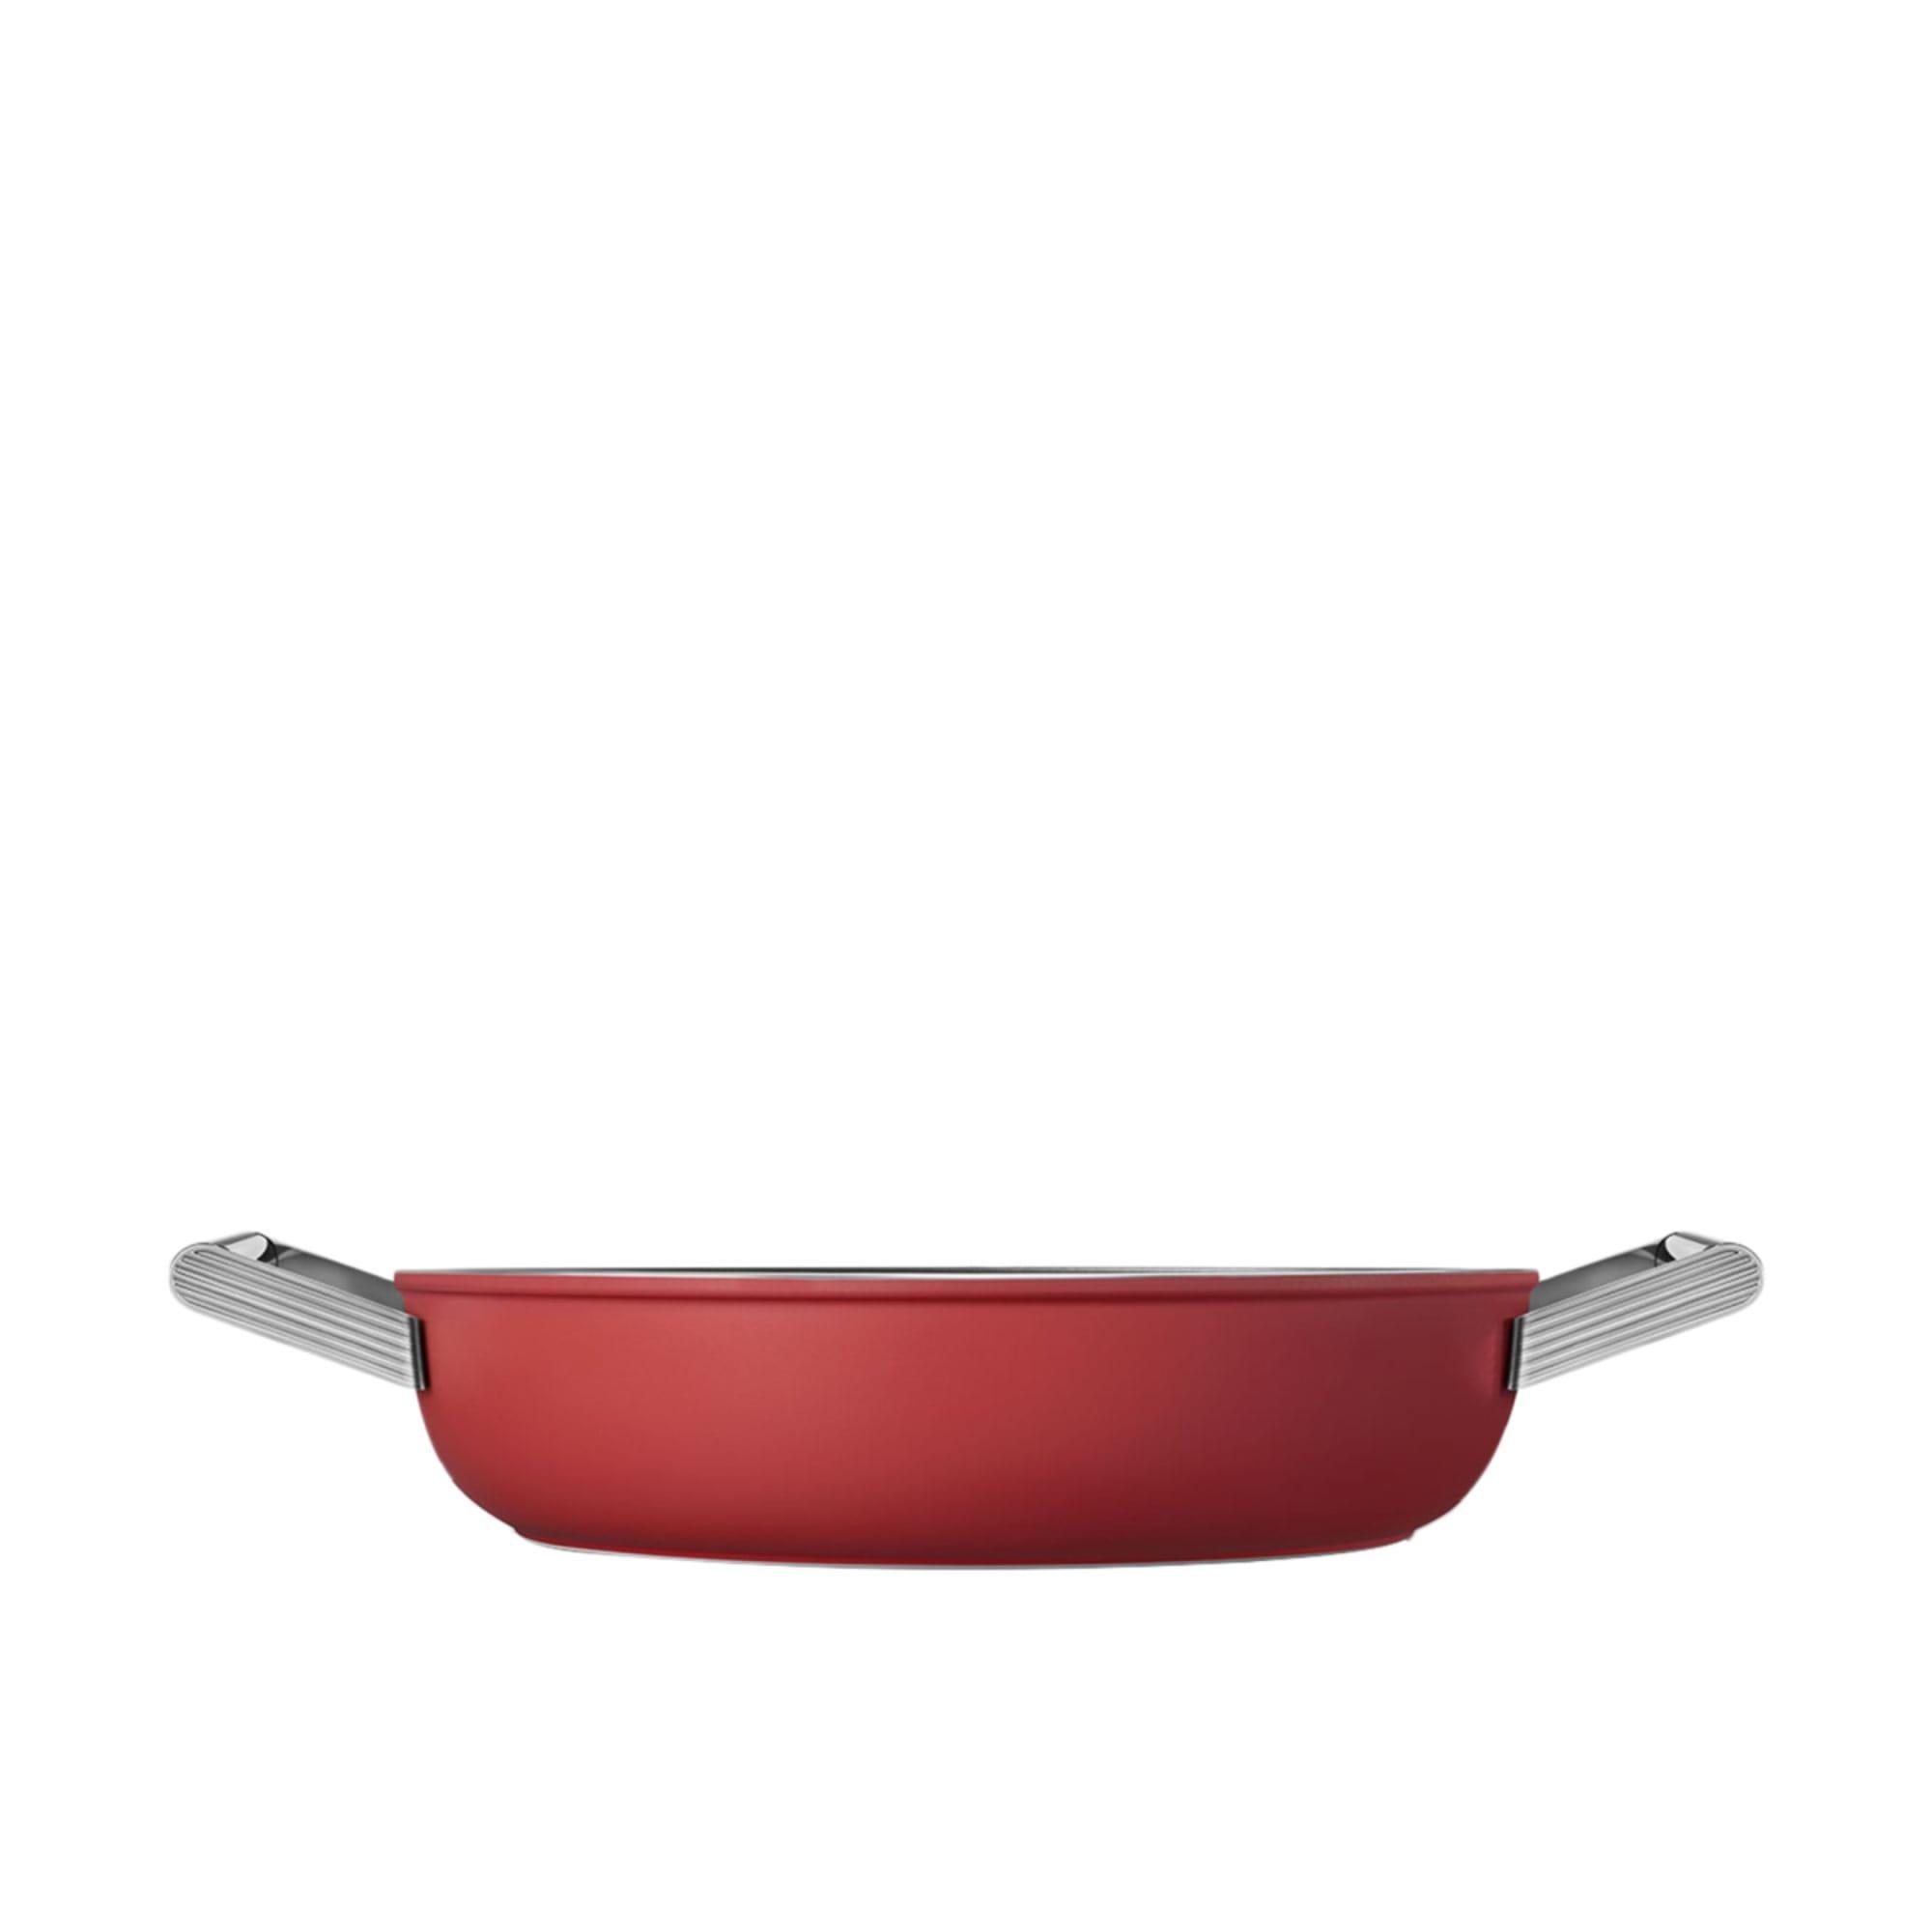 Smeg Non Stick Chef's Pan with Lid 28cm - 3.7L Red Image 3